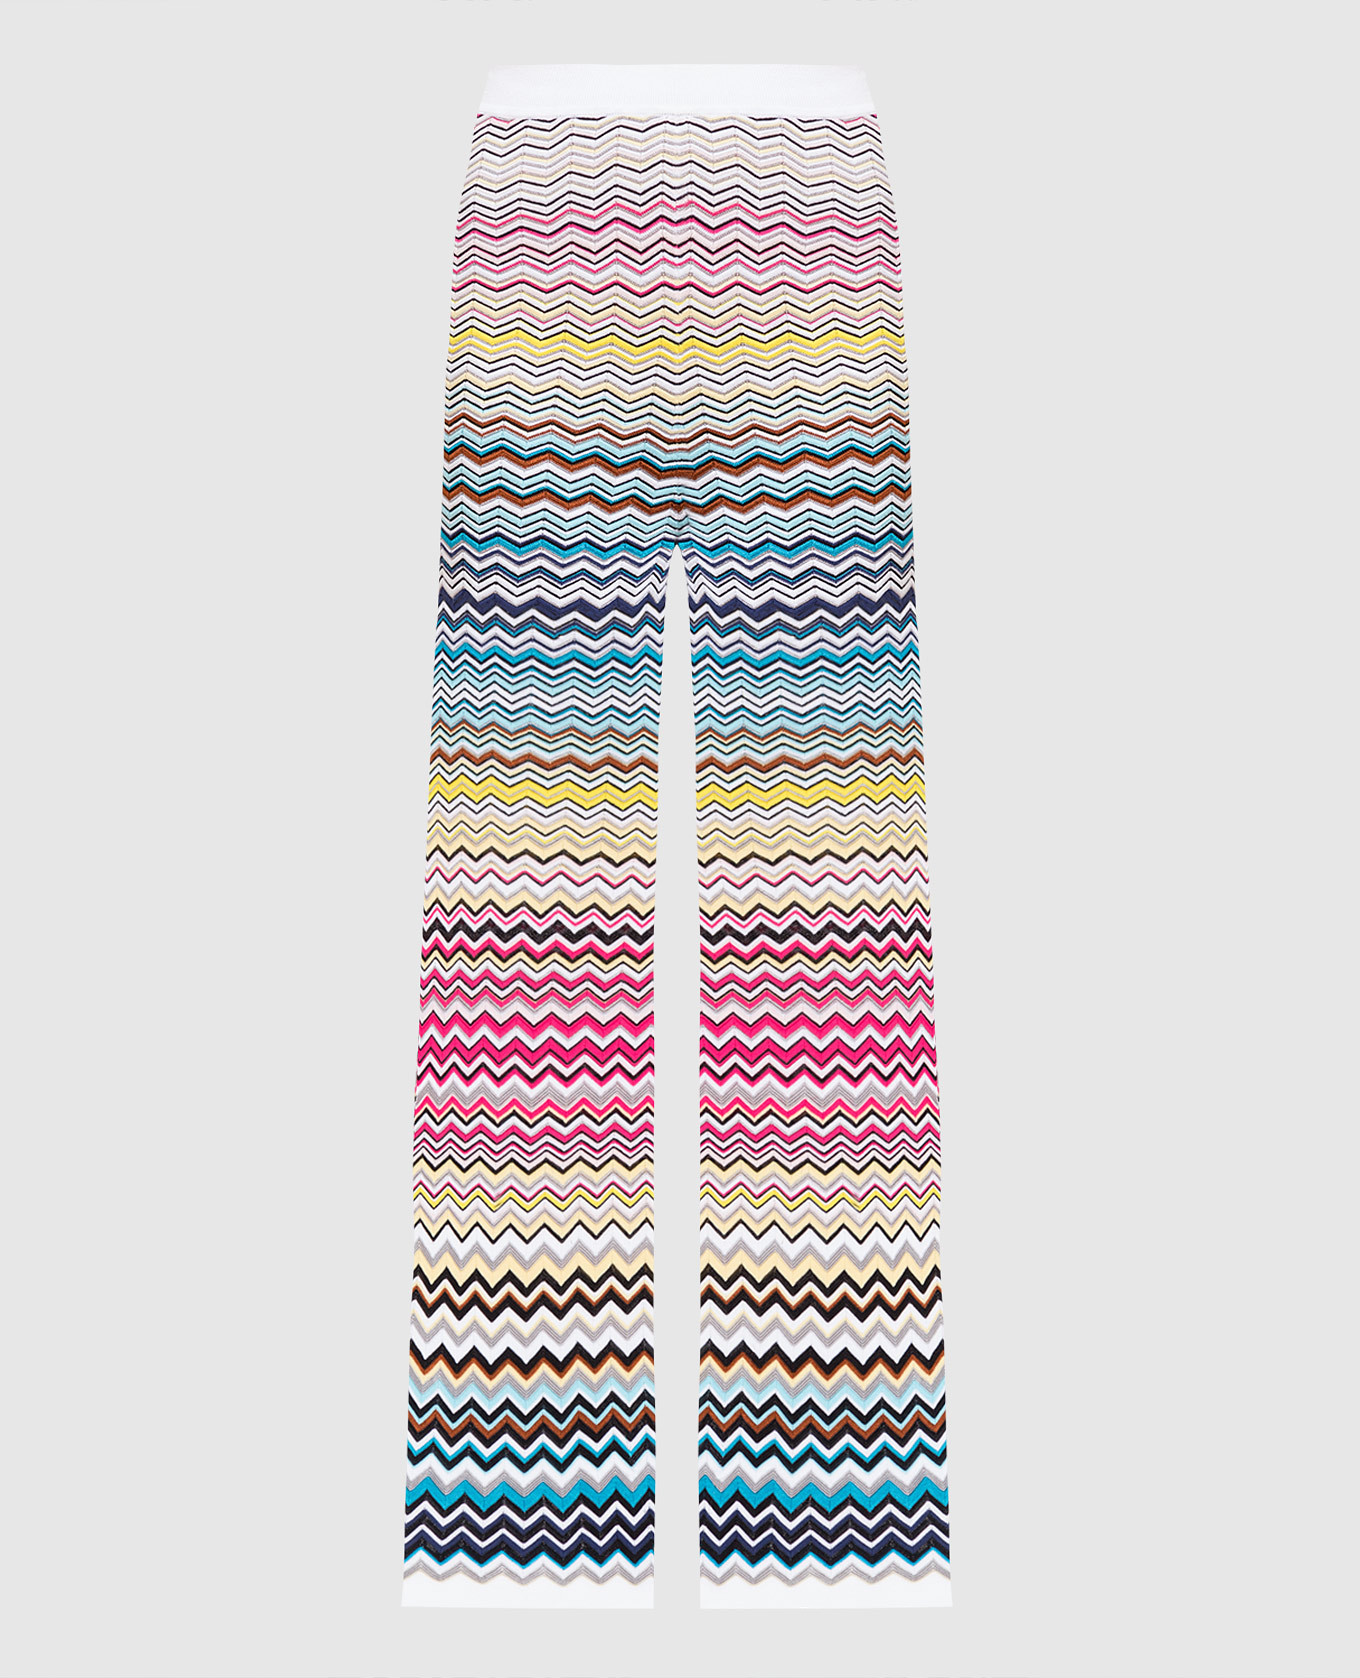 Pants with a high fit in a geometric pattern